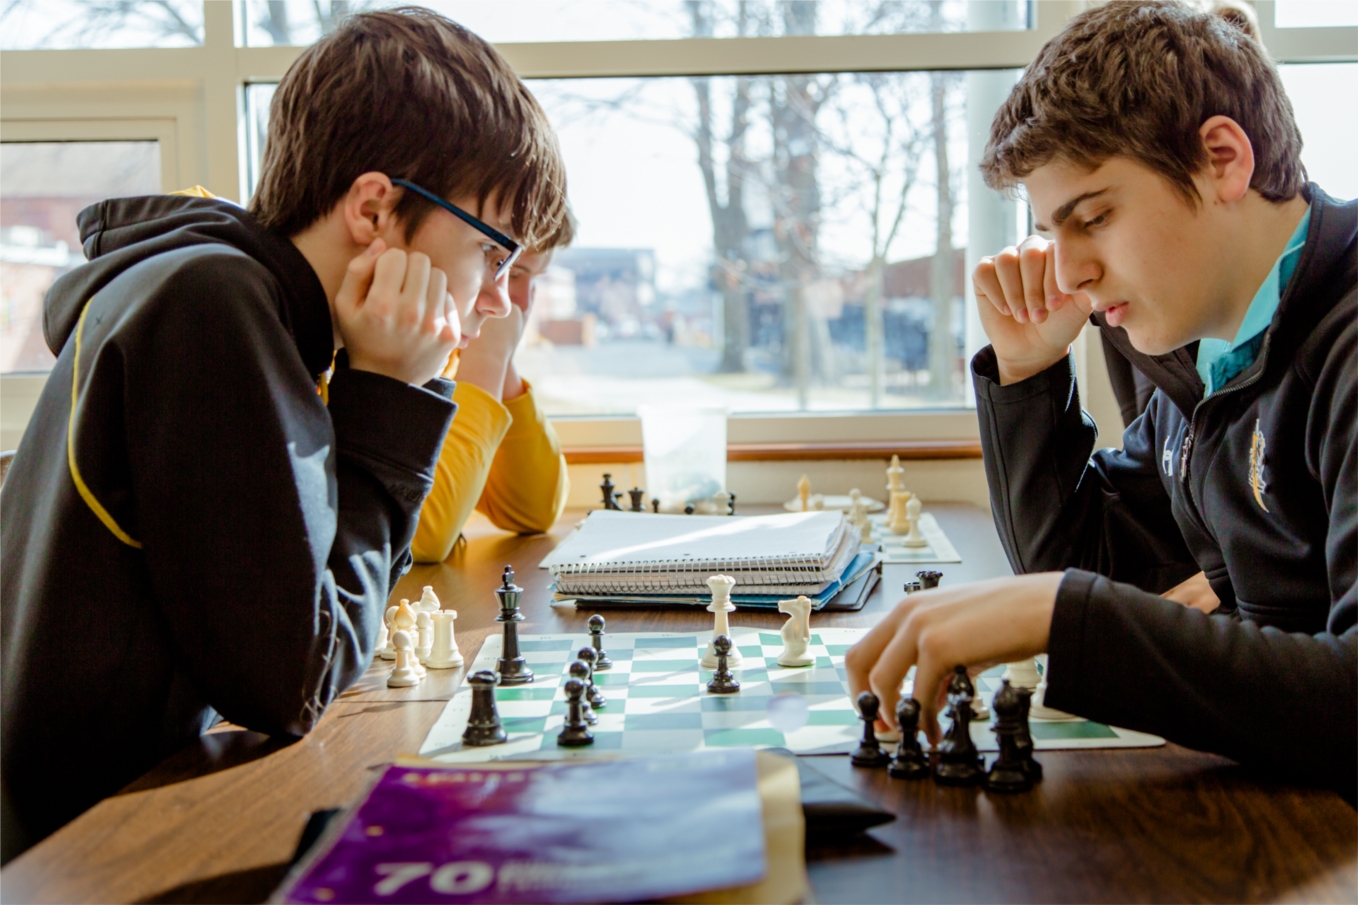 Vianney has won 2 National Championships in Chess in the last 5 years.